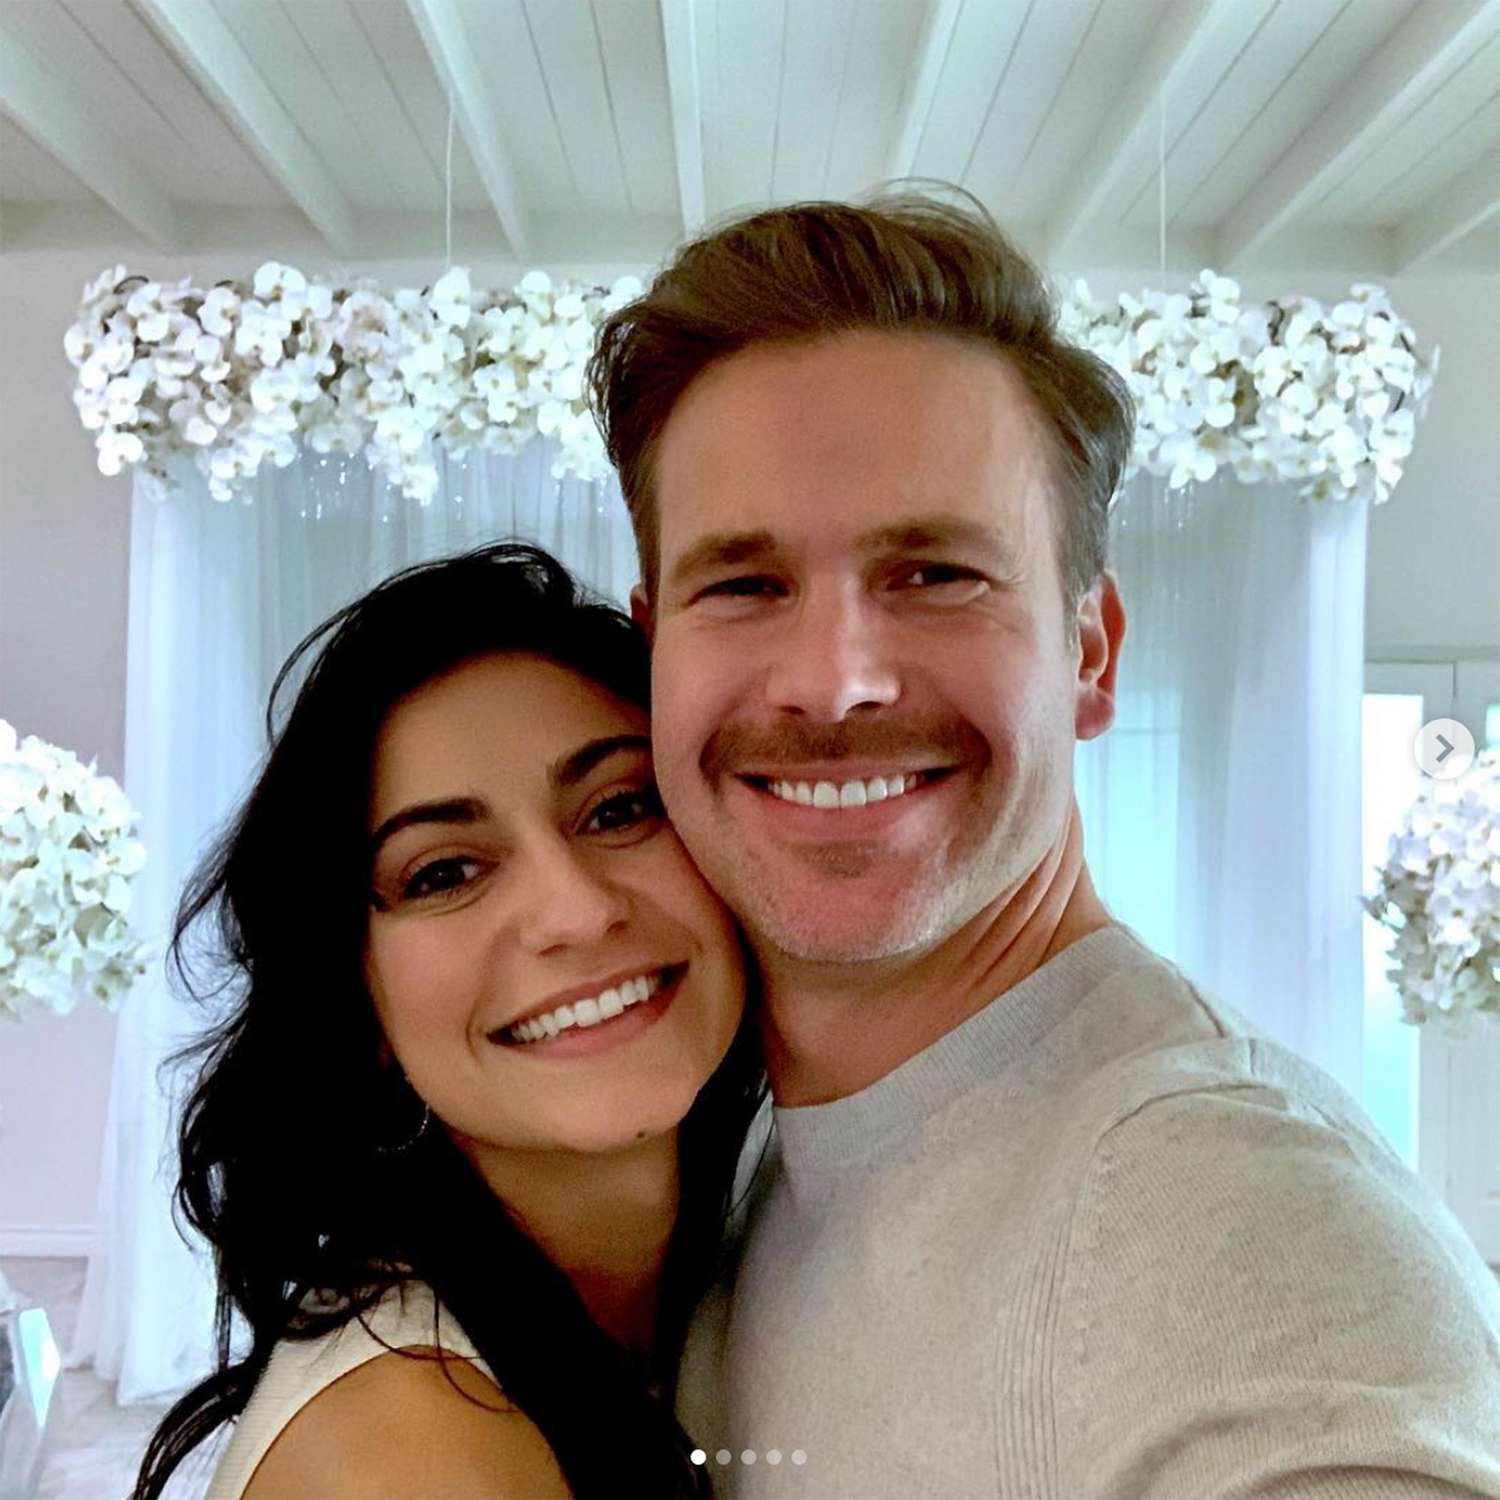 <p>On Dec. 23, the Broadway star and his actress girlfriend got engaged and married on the same day.</p>
                            <p>The Vampire Diaries actor, and his bride, whose Instagram handle already uses Davis' last name, shared their eventful wedding on Instagram.</p>
                            <p>The venue was the Albertson Wedding Chapel in Los Angeles. "This is where we got married &hellip; in a strip mall," Kiley posted on her Instagram Story.</p>
                            